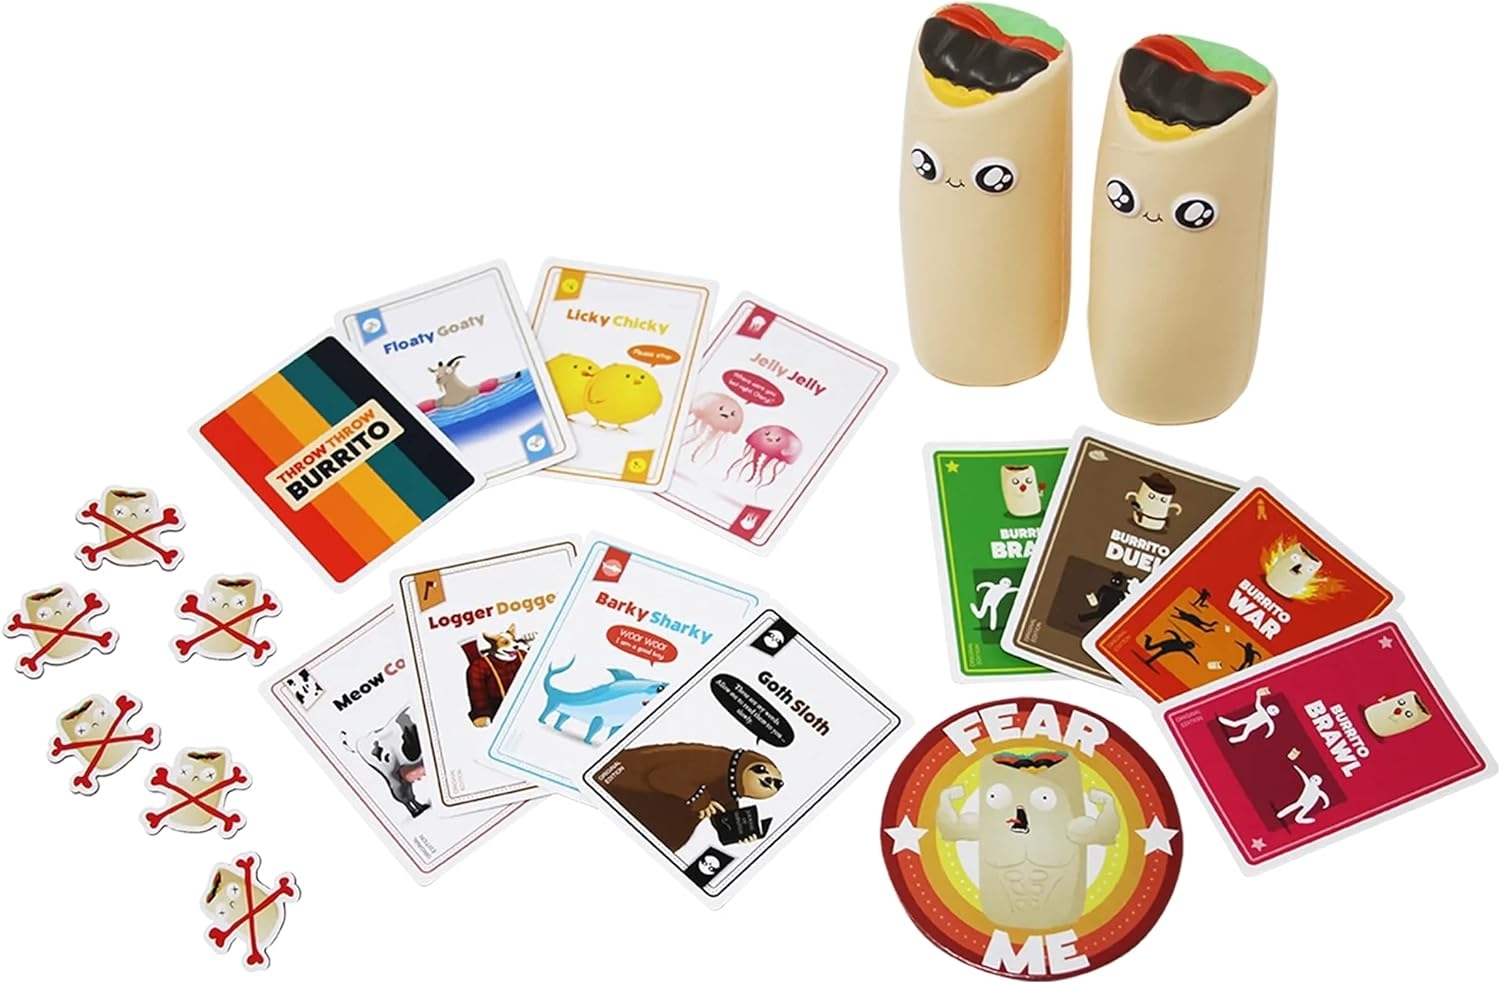 the two foam burritos with the game cards and tokens